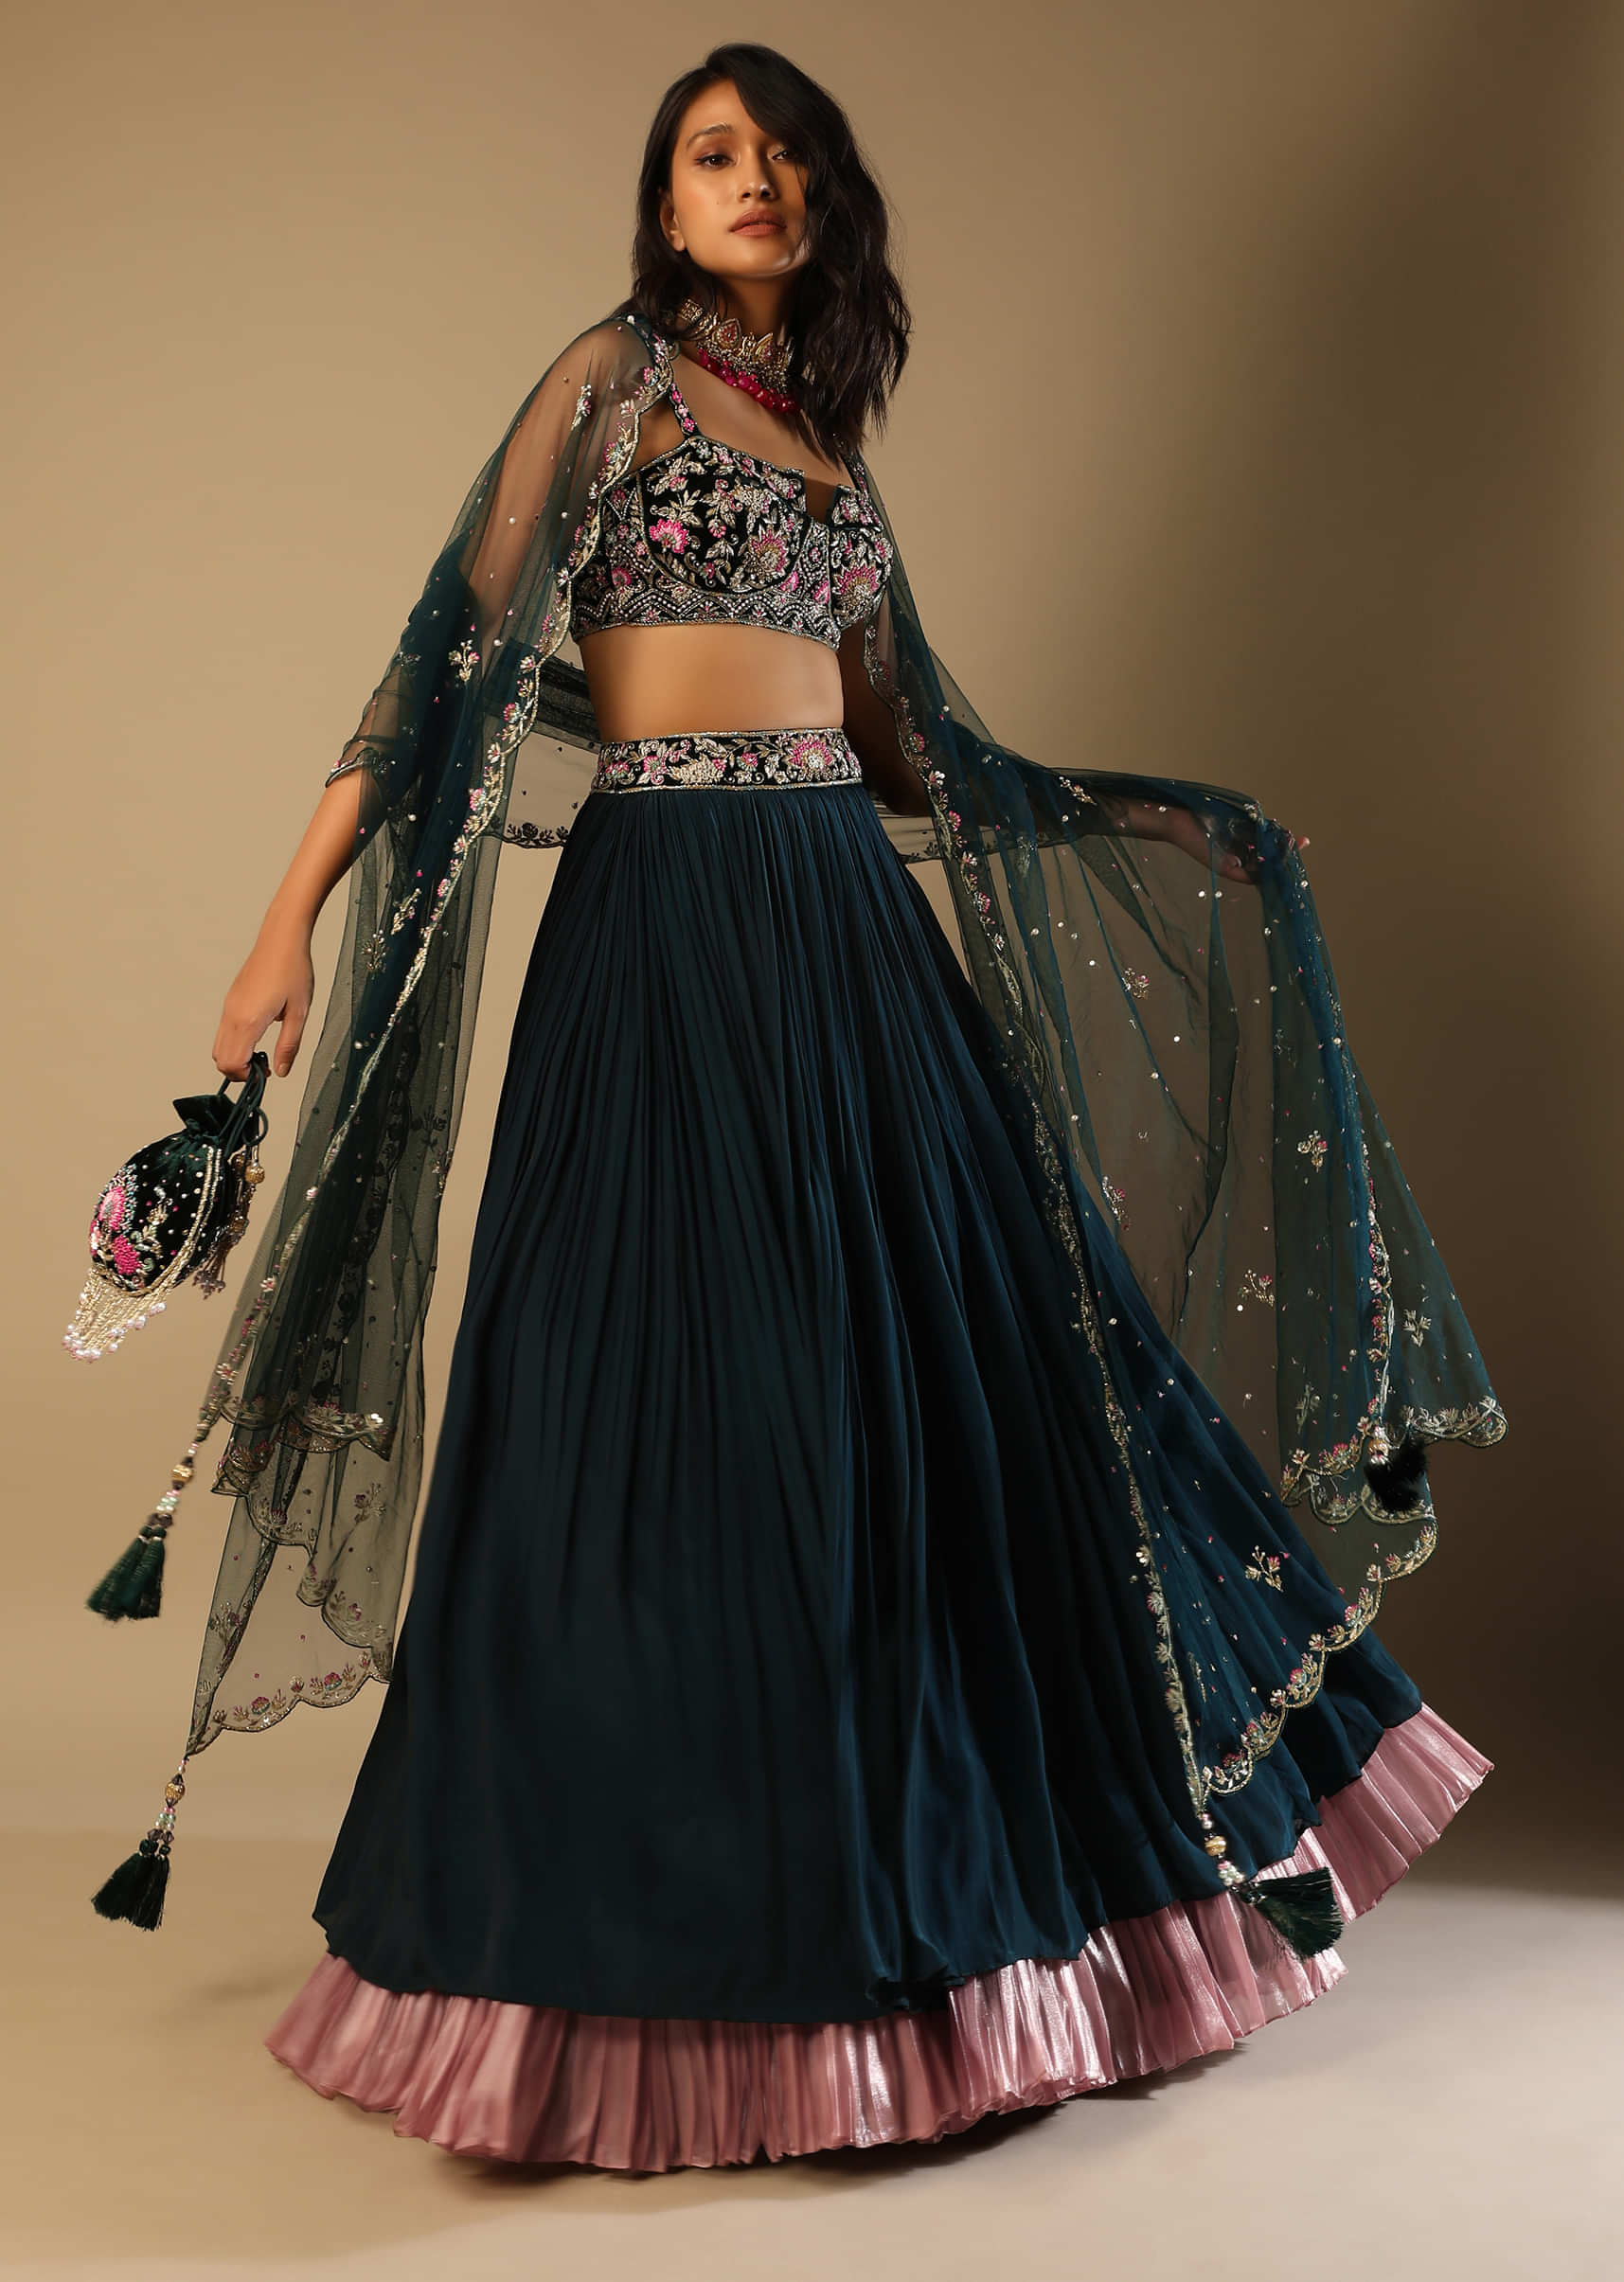 Emerald Green Lehenga With Hand Embroidered Choli Using Multi Colored Floral Motifs 